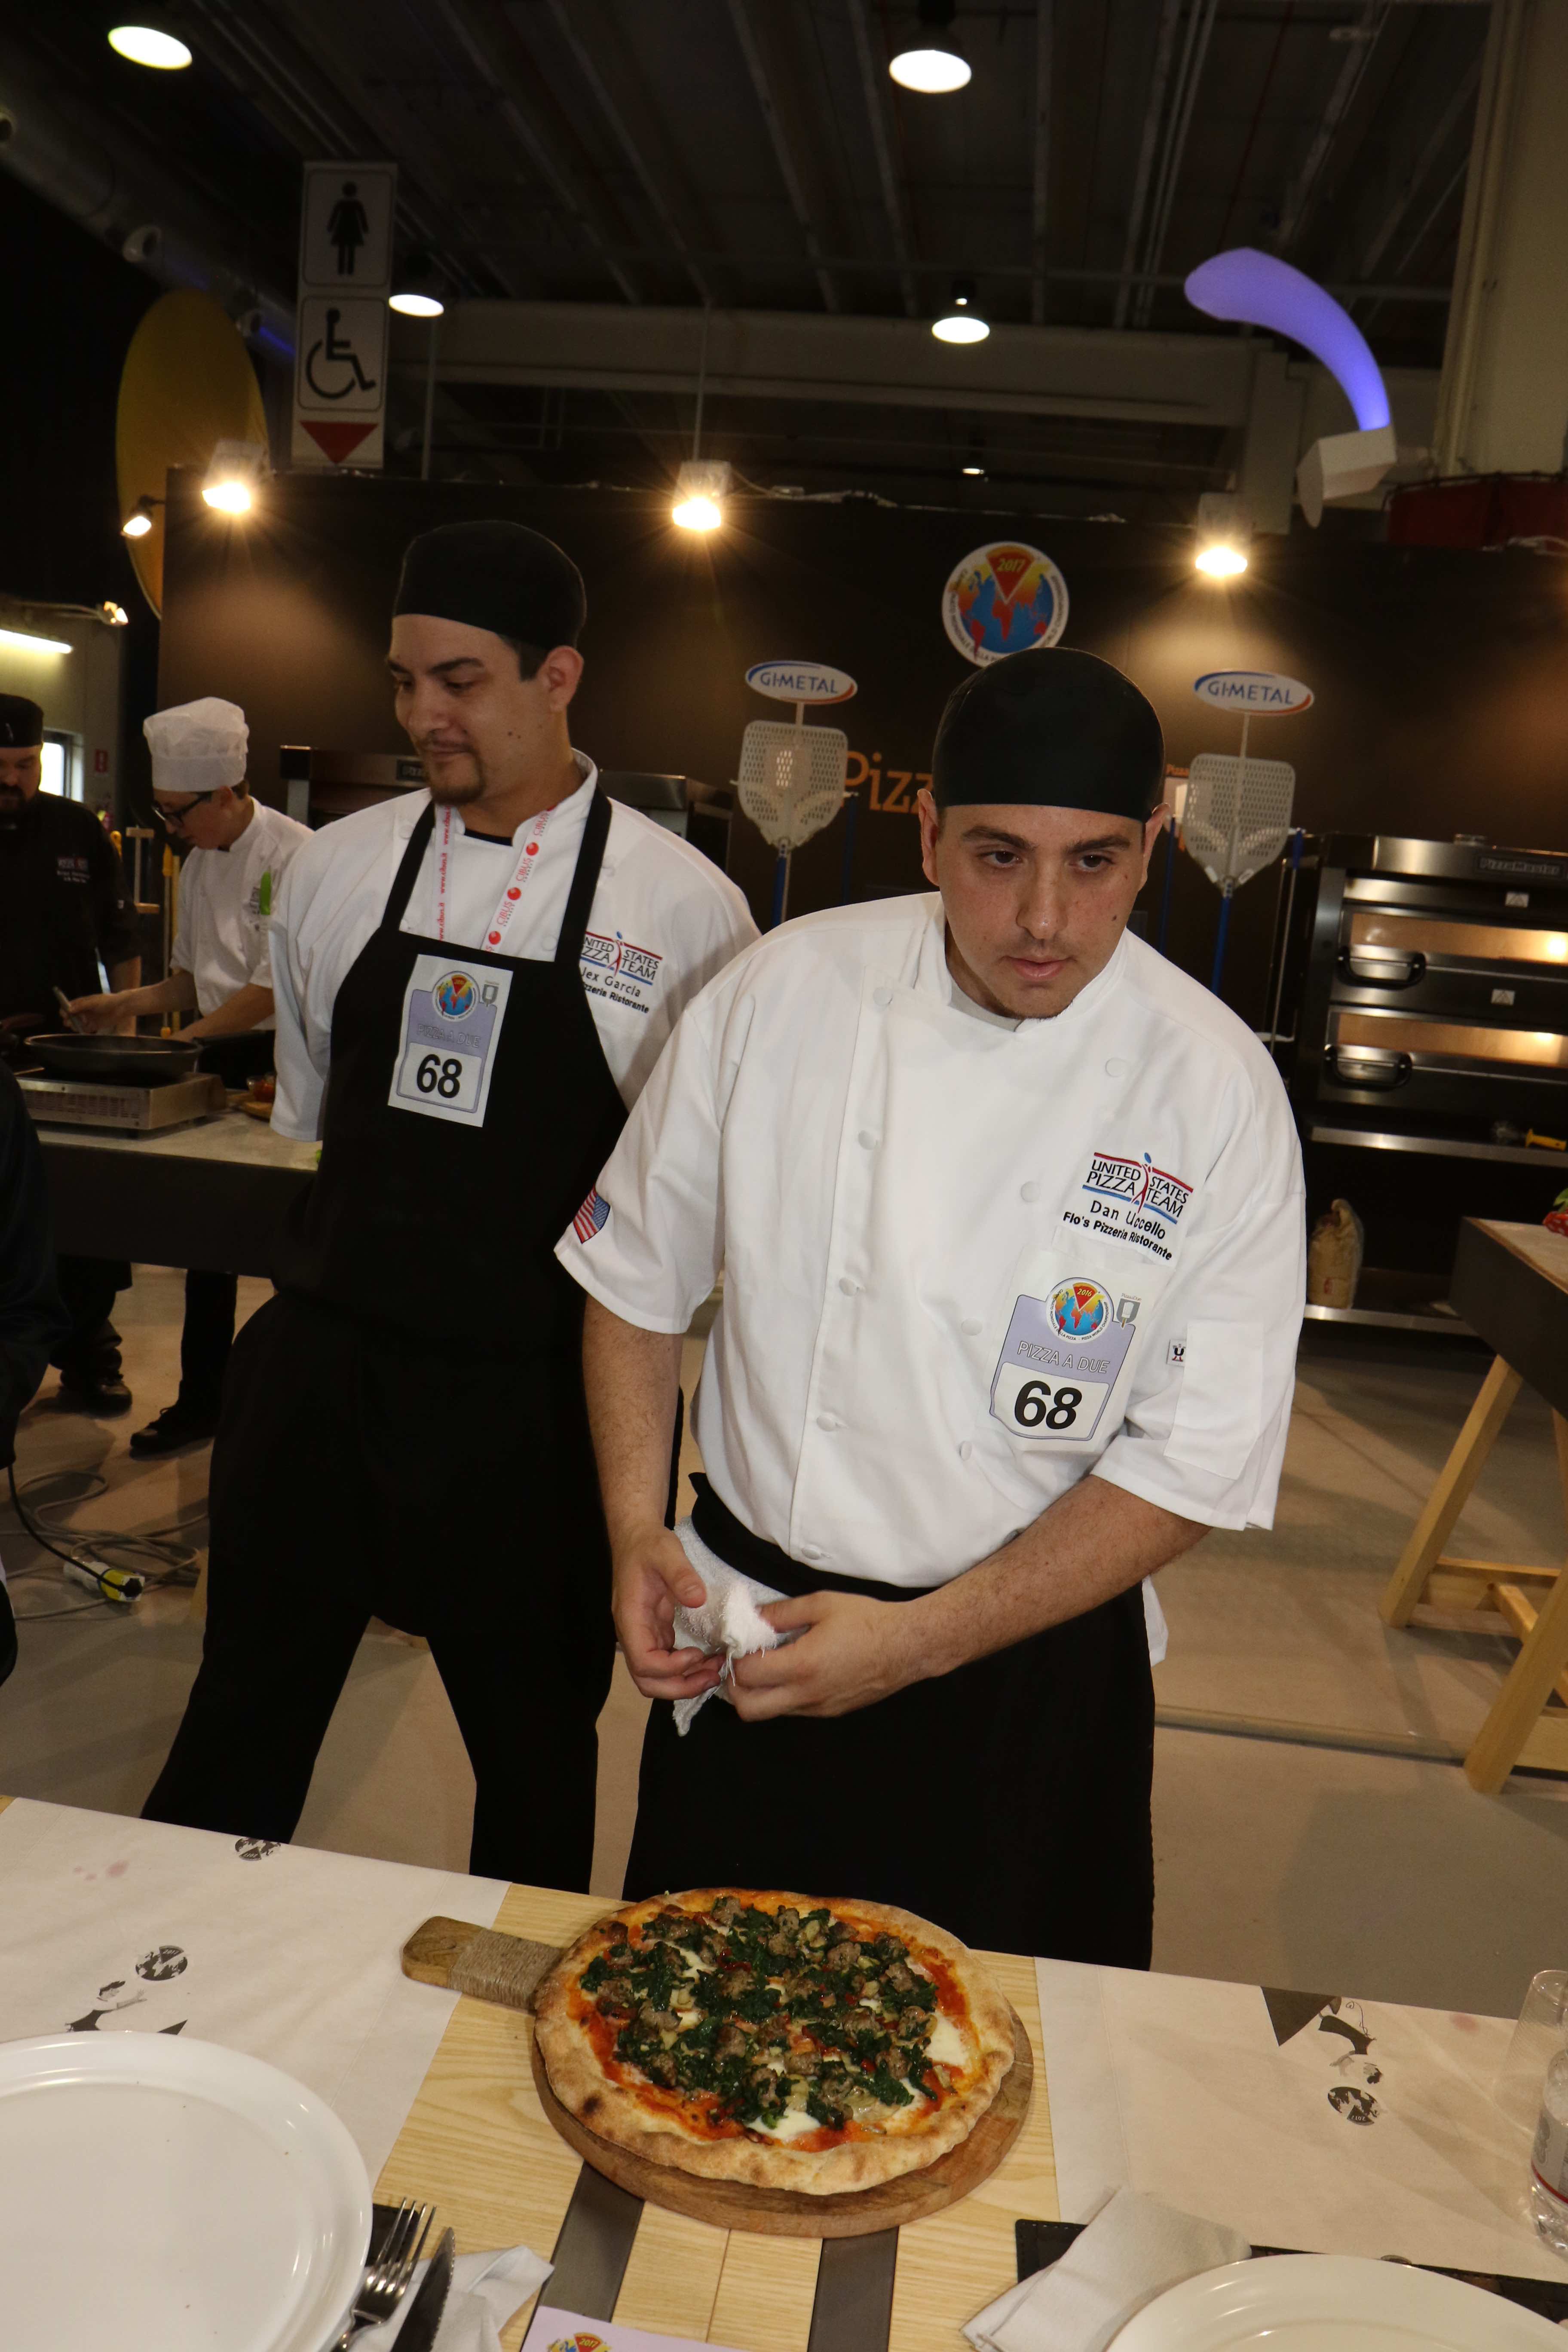 Dan Uccello Presents his Winning Pizza to the Judges